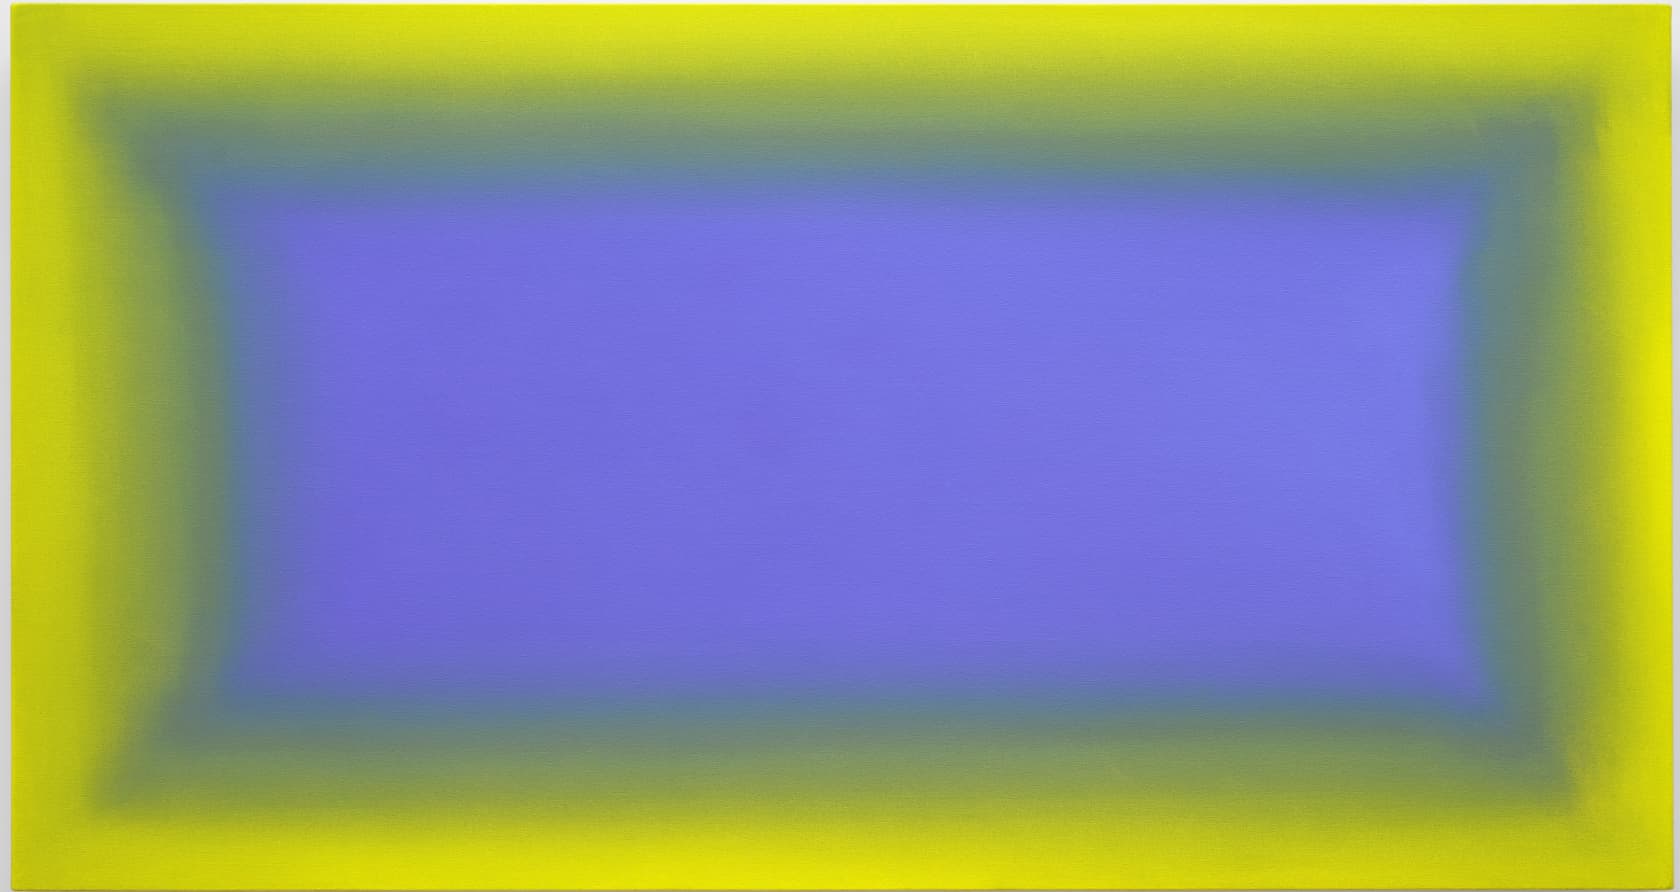 Ruth Pastine, Violet (Yellow), Core Series, 2021